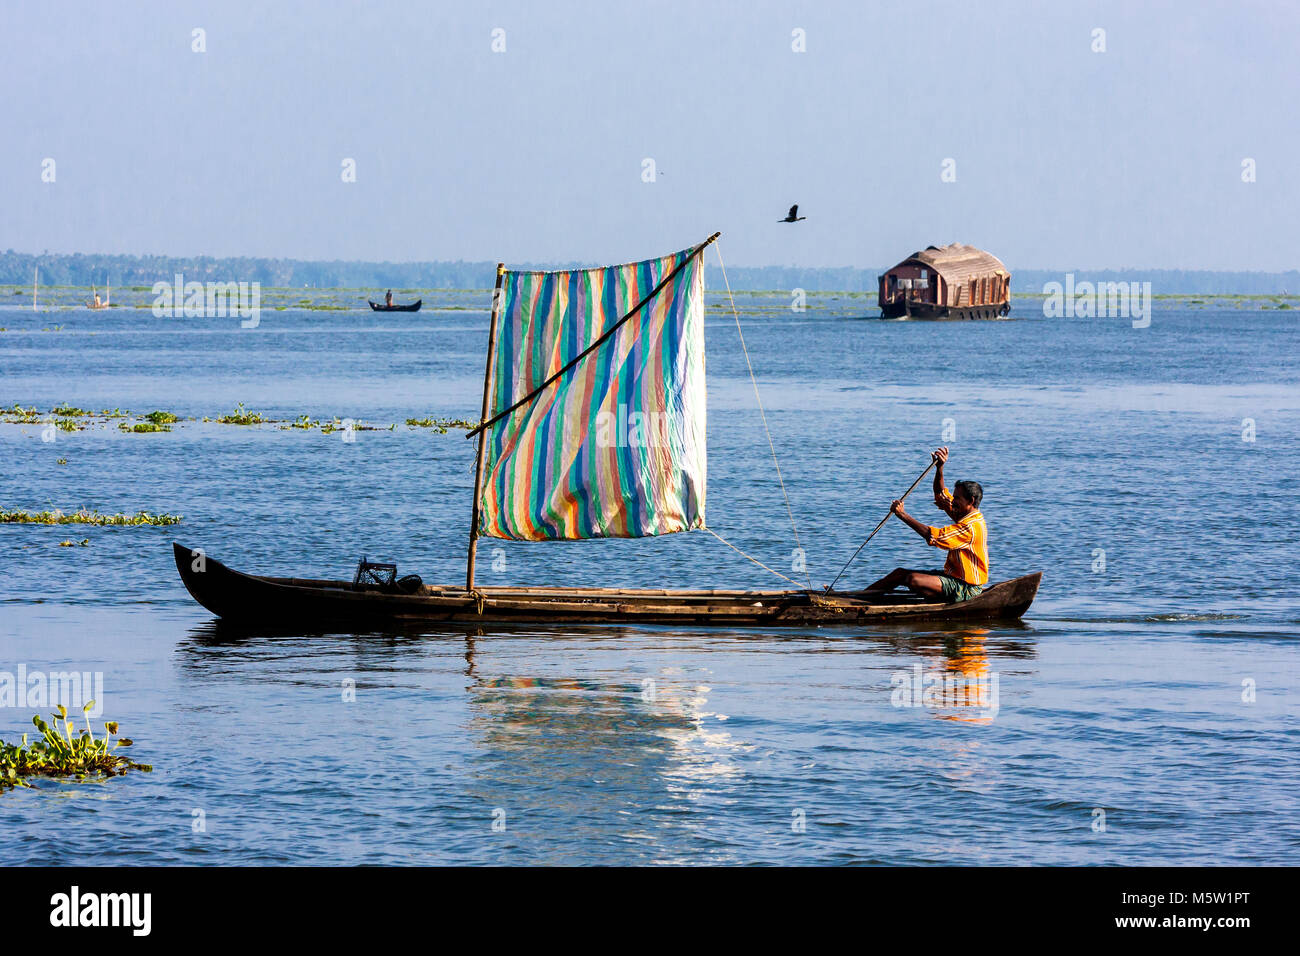 Sailing on a canoe fitted with a sail. On Vembanad lake near Alleppey and Kumarakom in Kerala, India. Stock Photo